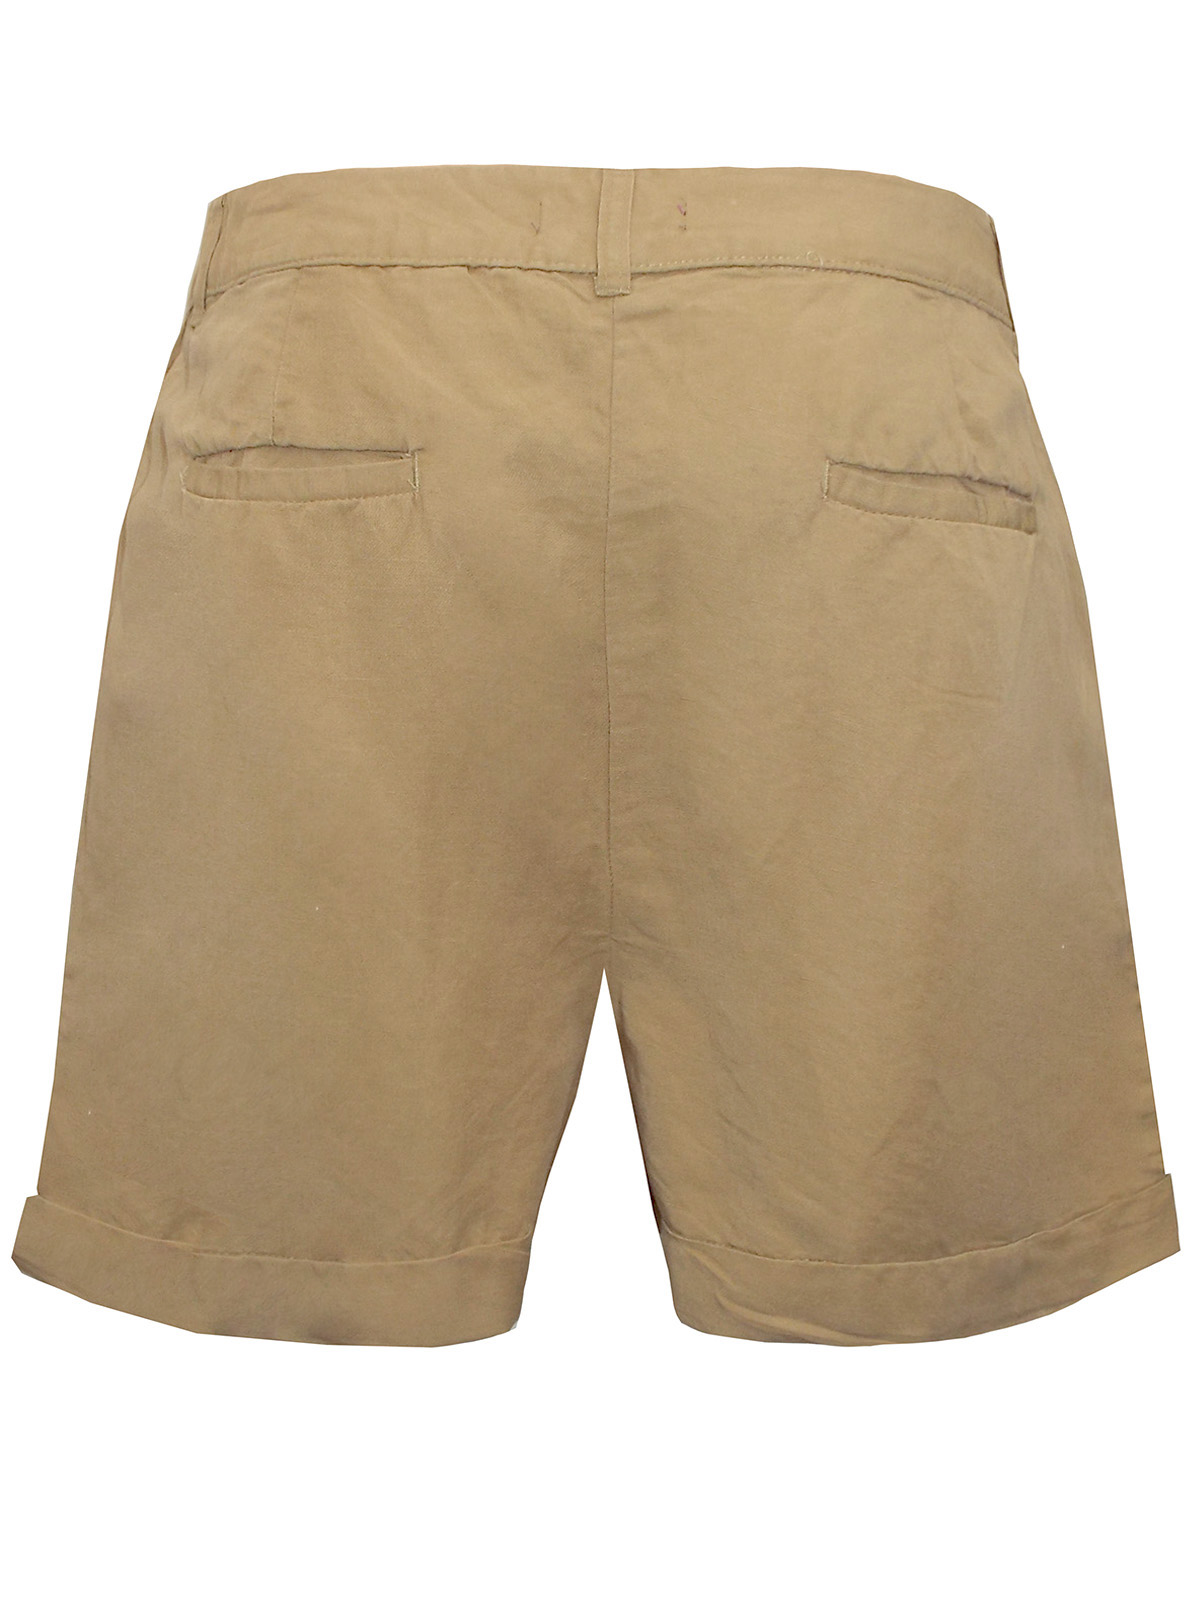 Marks and Spencer - - M&5 NATURAL Linen Blend Shorts - Plus Size 18 to 24